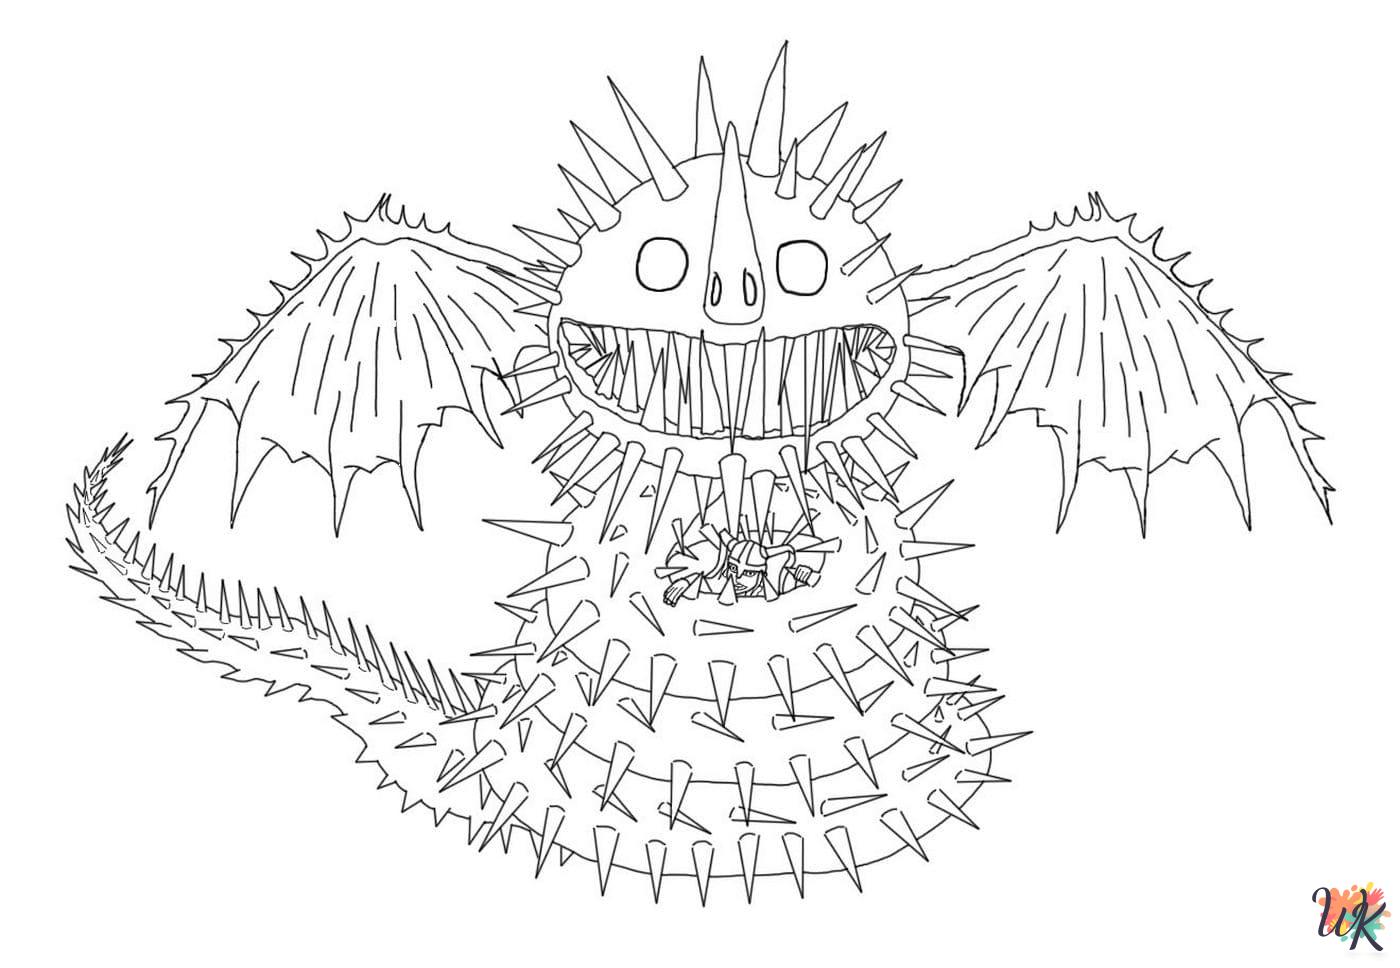 How To Train Your Dragon cards coloring pages